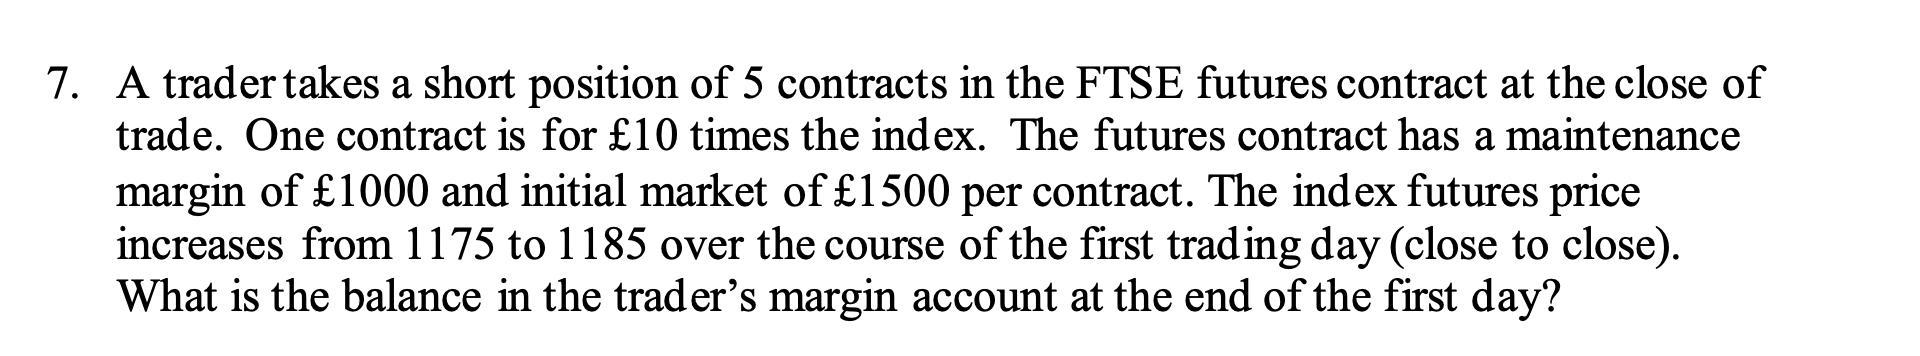 a 7. A trader takes a short position of 5 contracts in the FTSE futures contract at the close of trade. One contract is for £